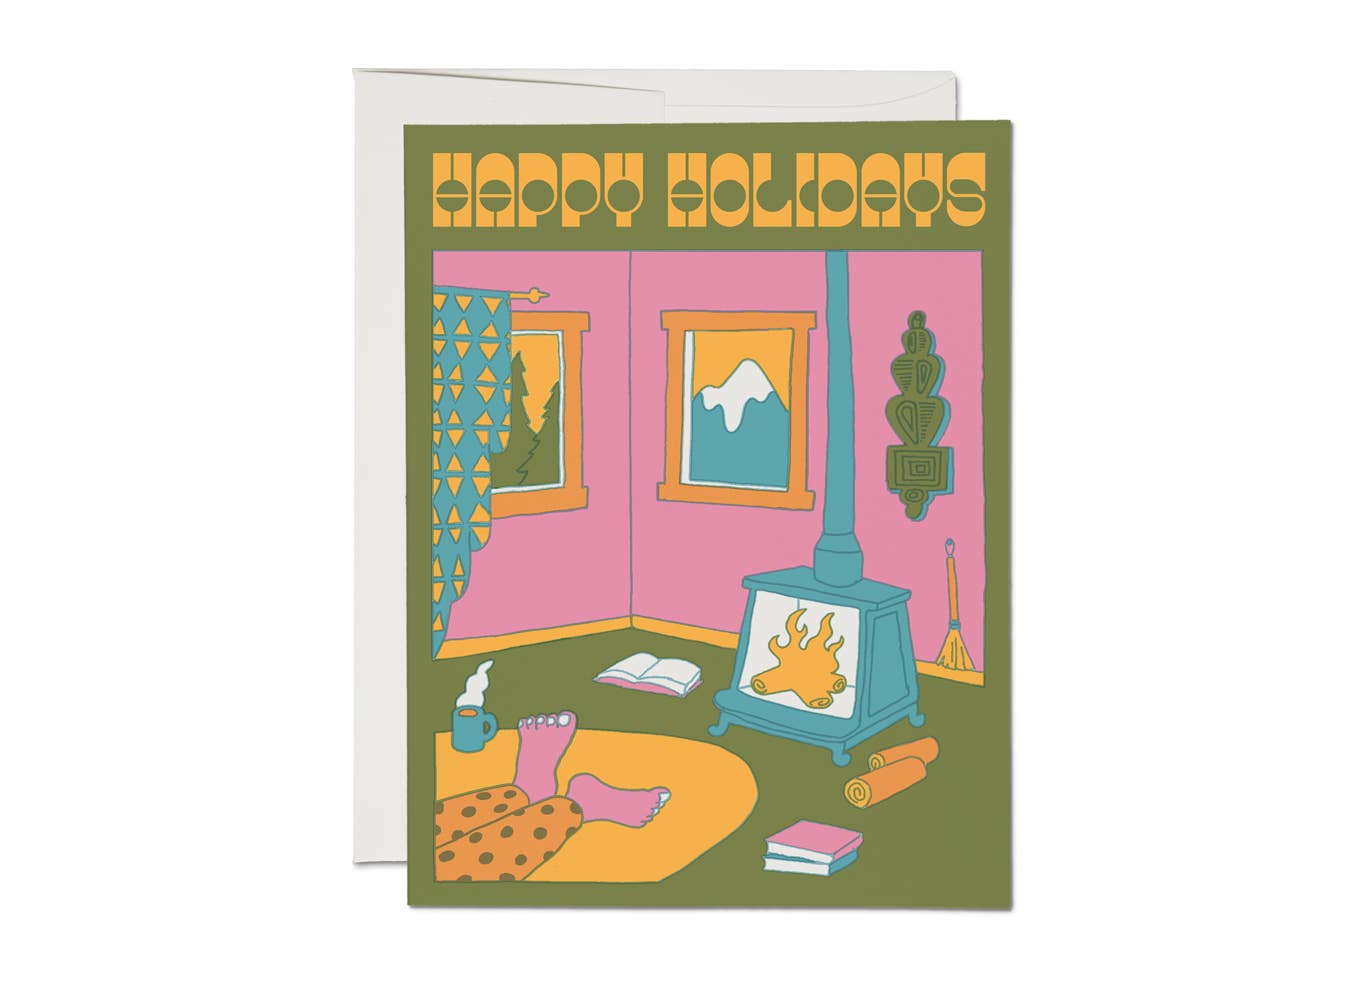 Fireplace holiday greeting card - The Crowd Went Wild